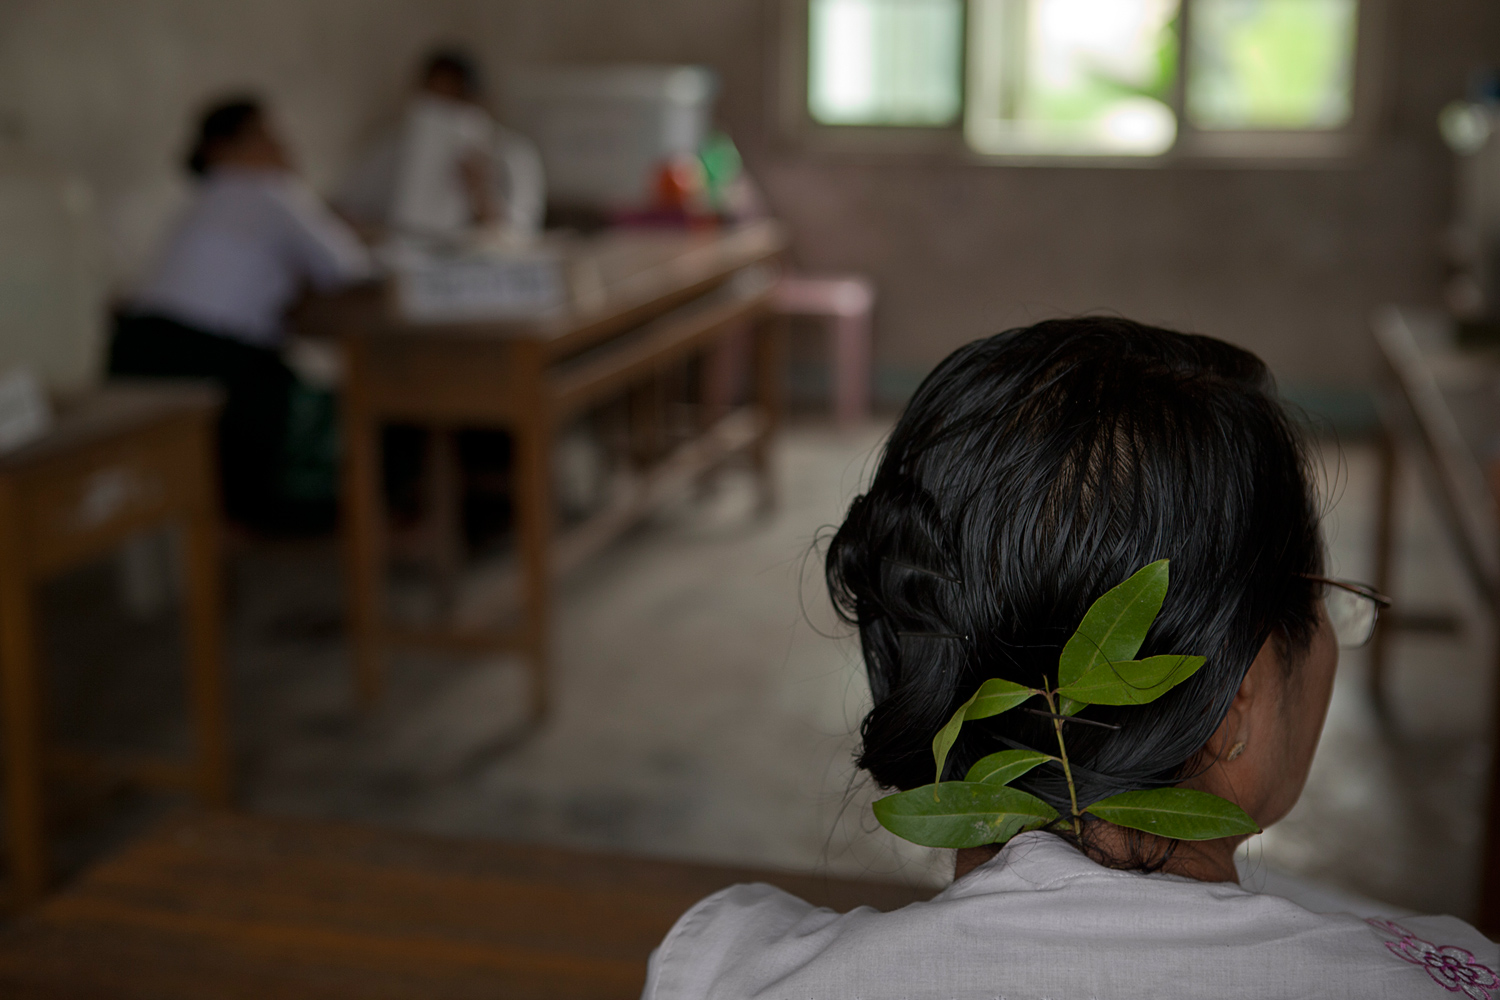 April 1, 2012. An election official at a polling station in a school in Yuzana Garden City in Dagon South Township decorates her hair with a leaf-filled twig.